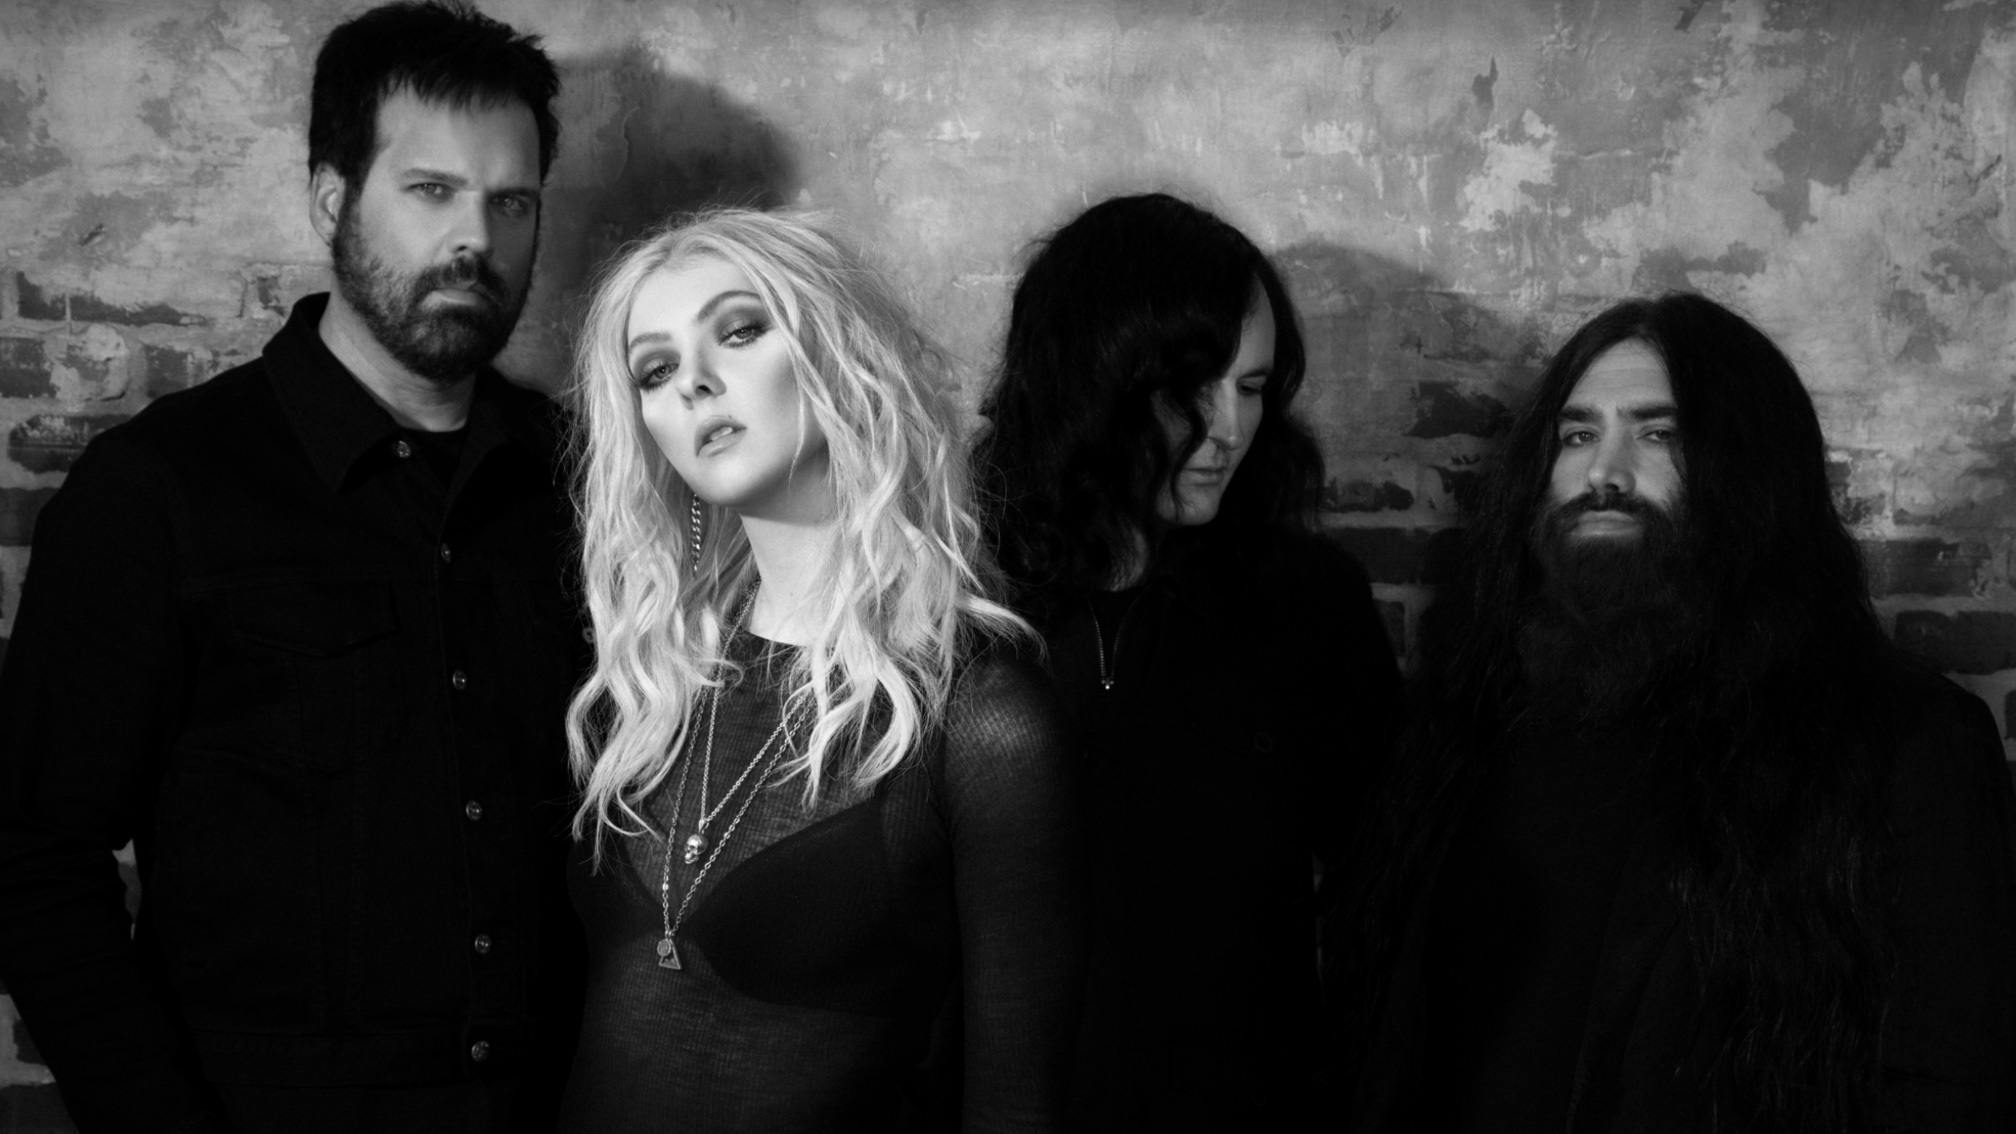 The Pretty Reckless' Death By Rock And Roll was the most downloaded album in the UK over the weekend